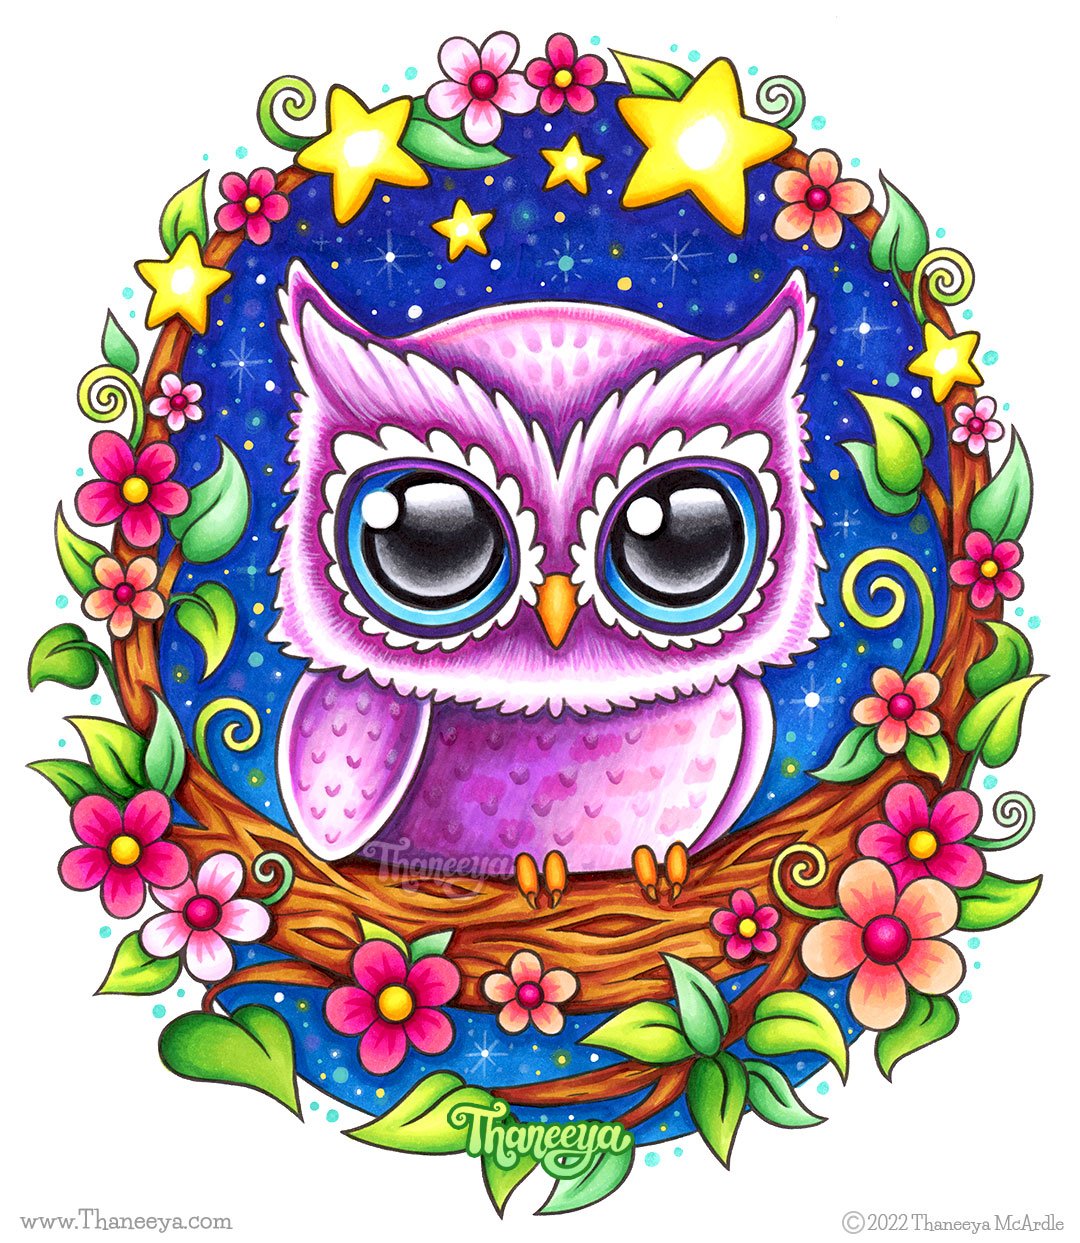 Colorful Owl Art by Thaneeya McArdle - Cute Whimsical Detailed ...